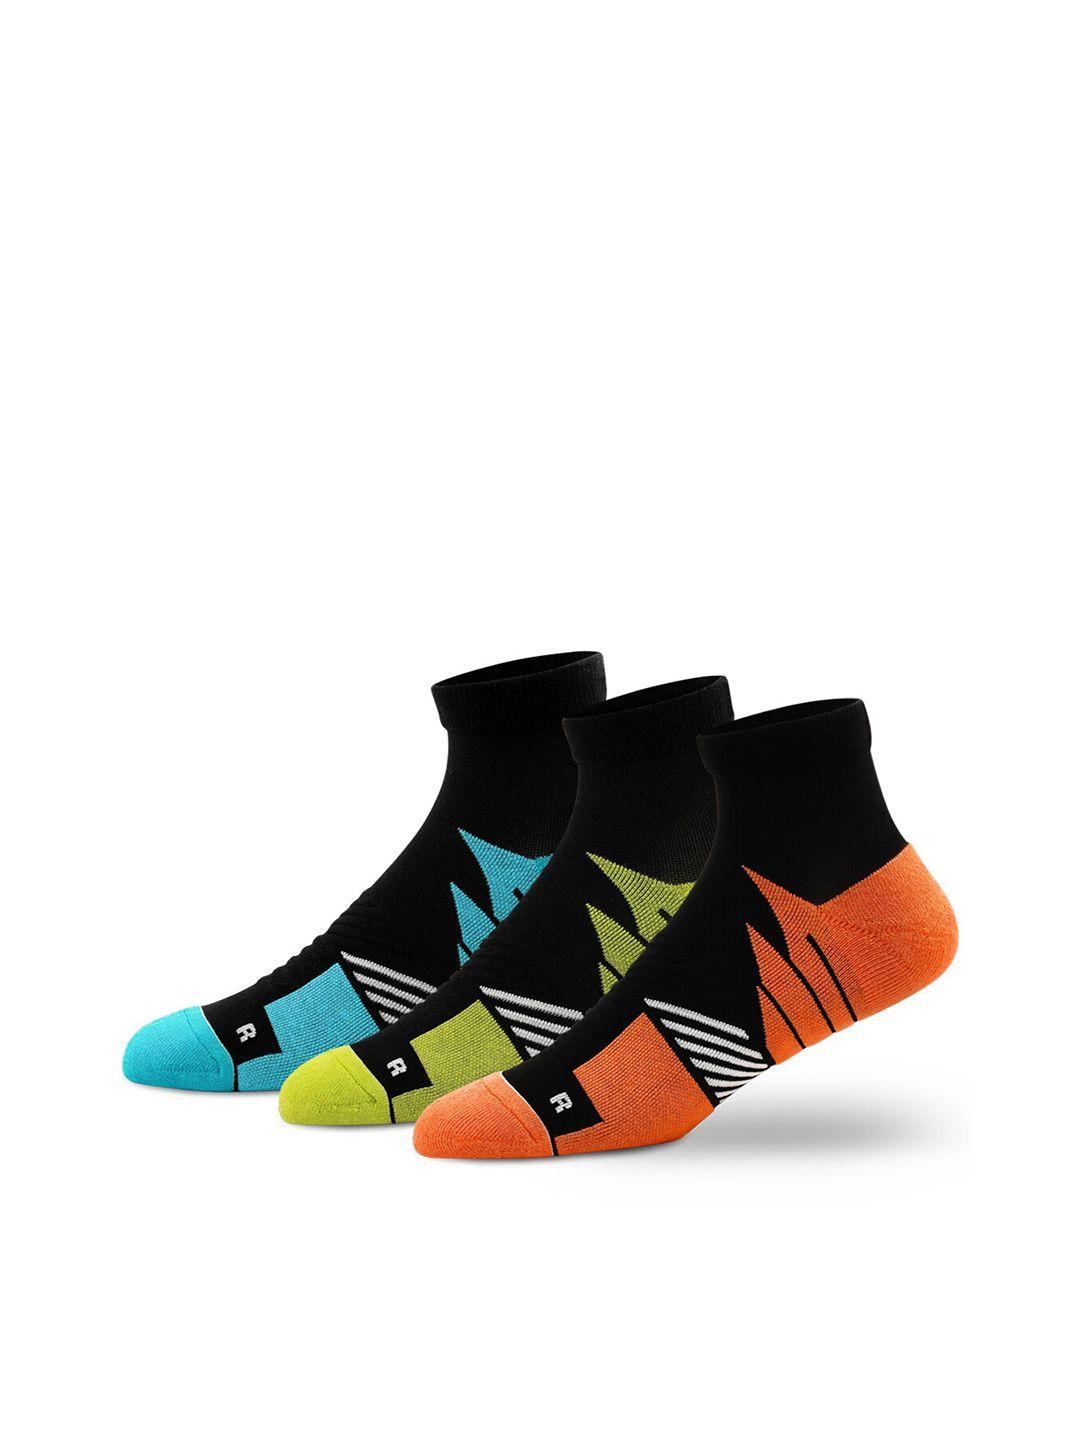 supersox men pack of 3 printed ankle length pure cotton socks